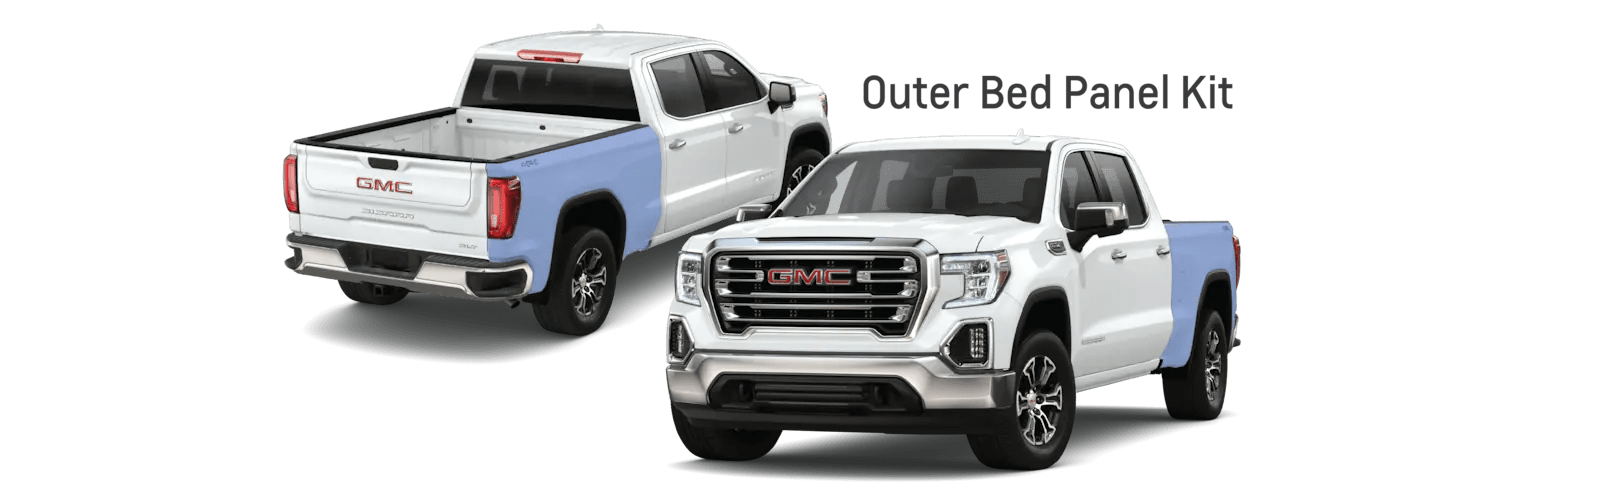 outer bed panel kit